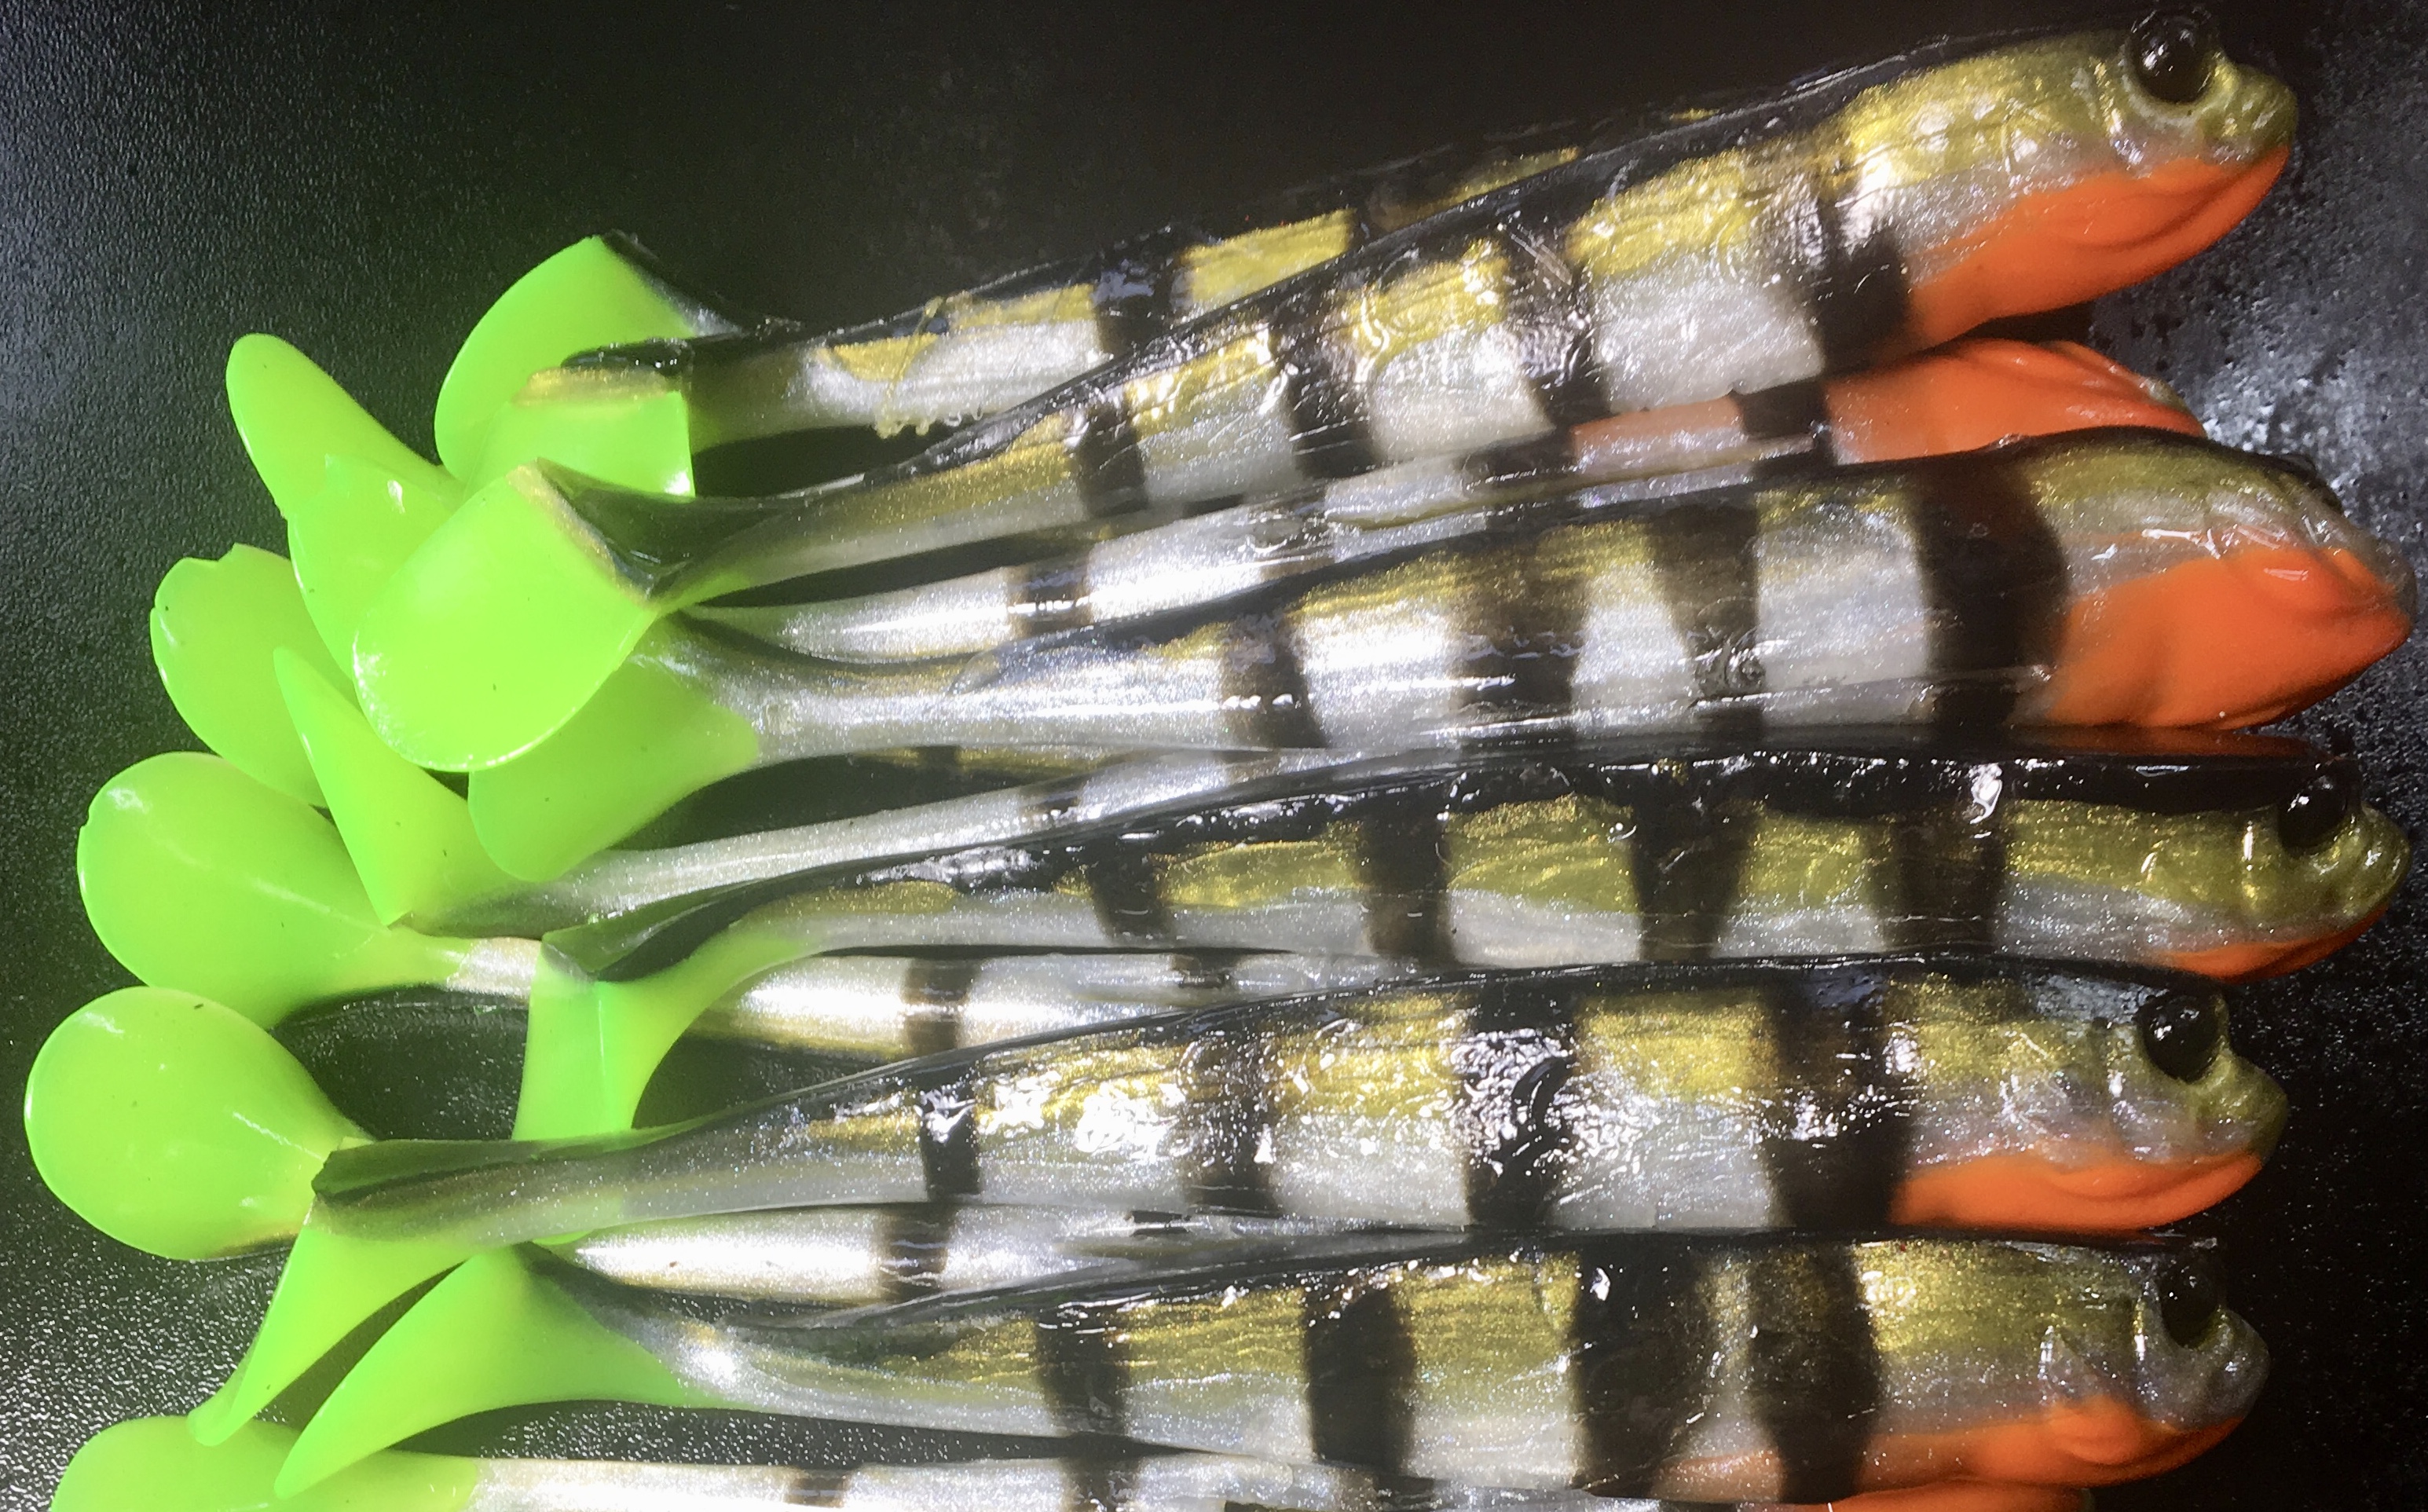 Limited Run* 5.5 Ripper Minnow Color: Natural Perch 25 count pack (Pre  Order 2-3 Weeks) - Paul Krew Custom Baits